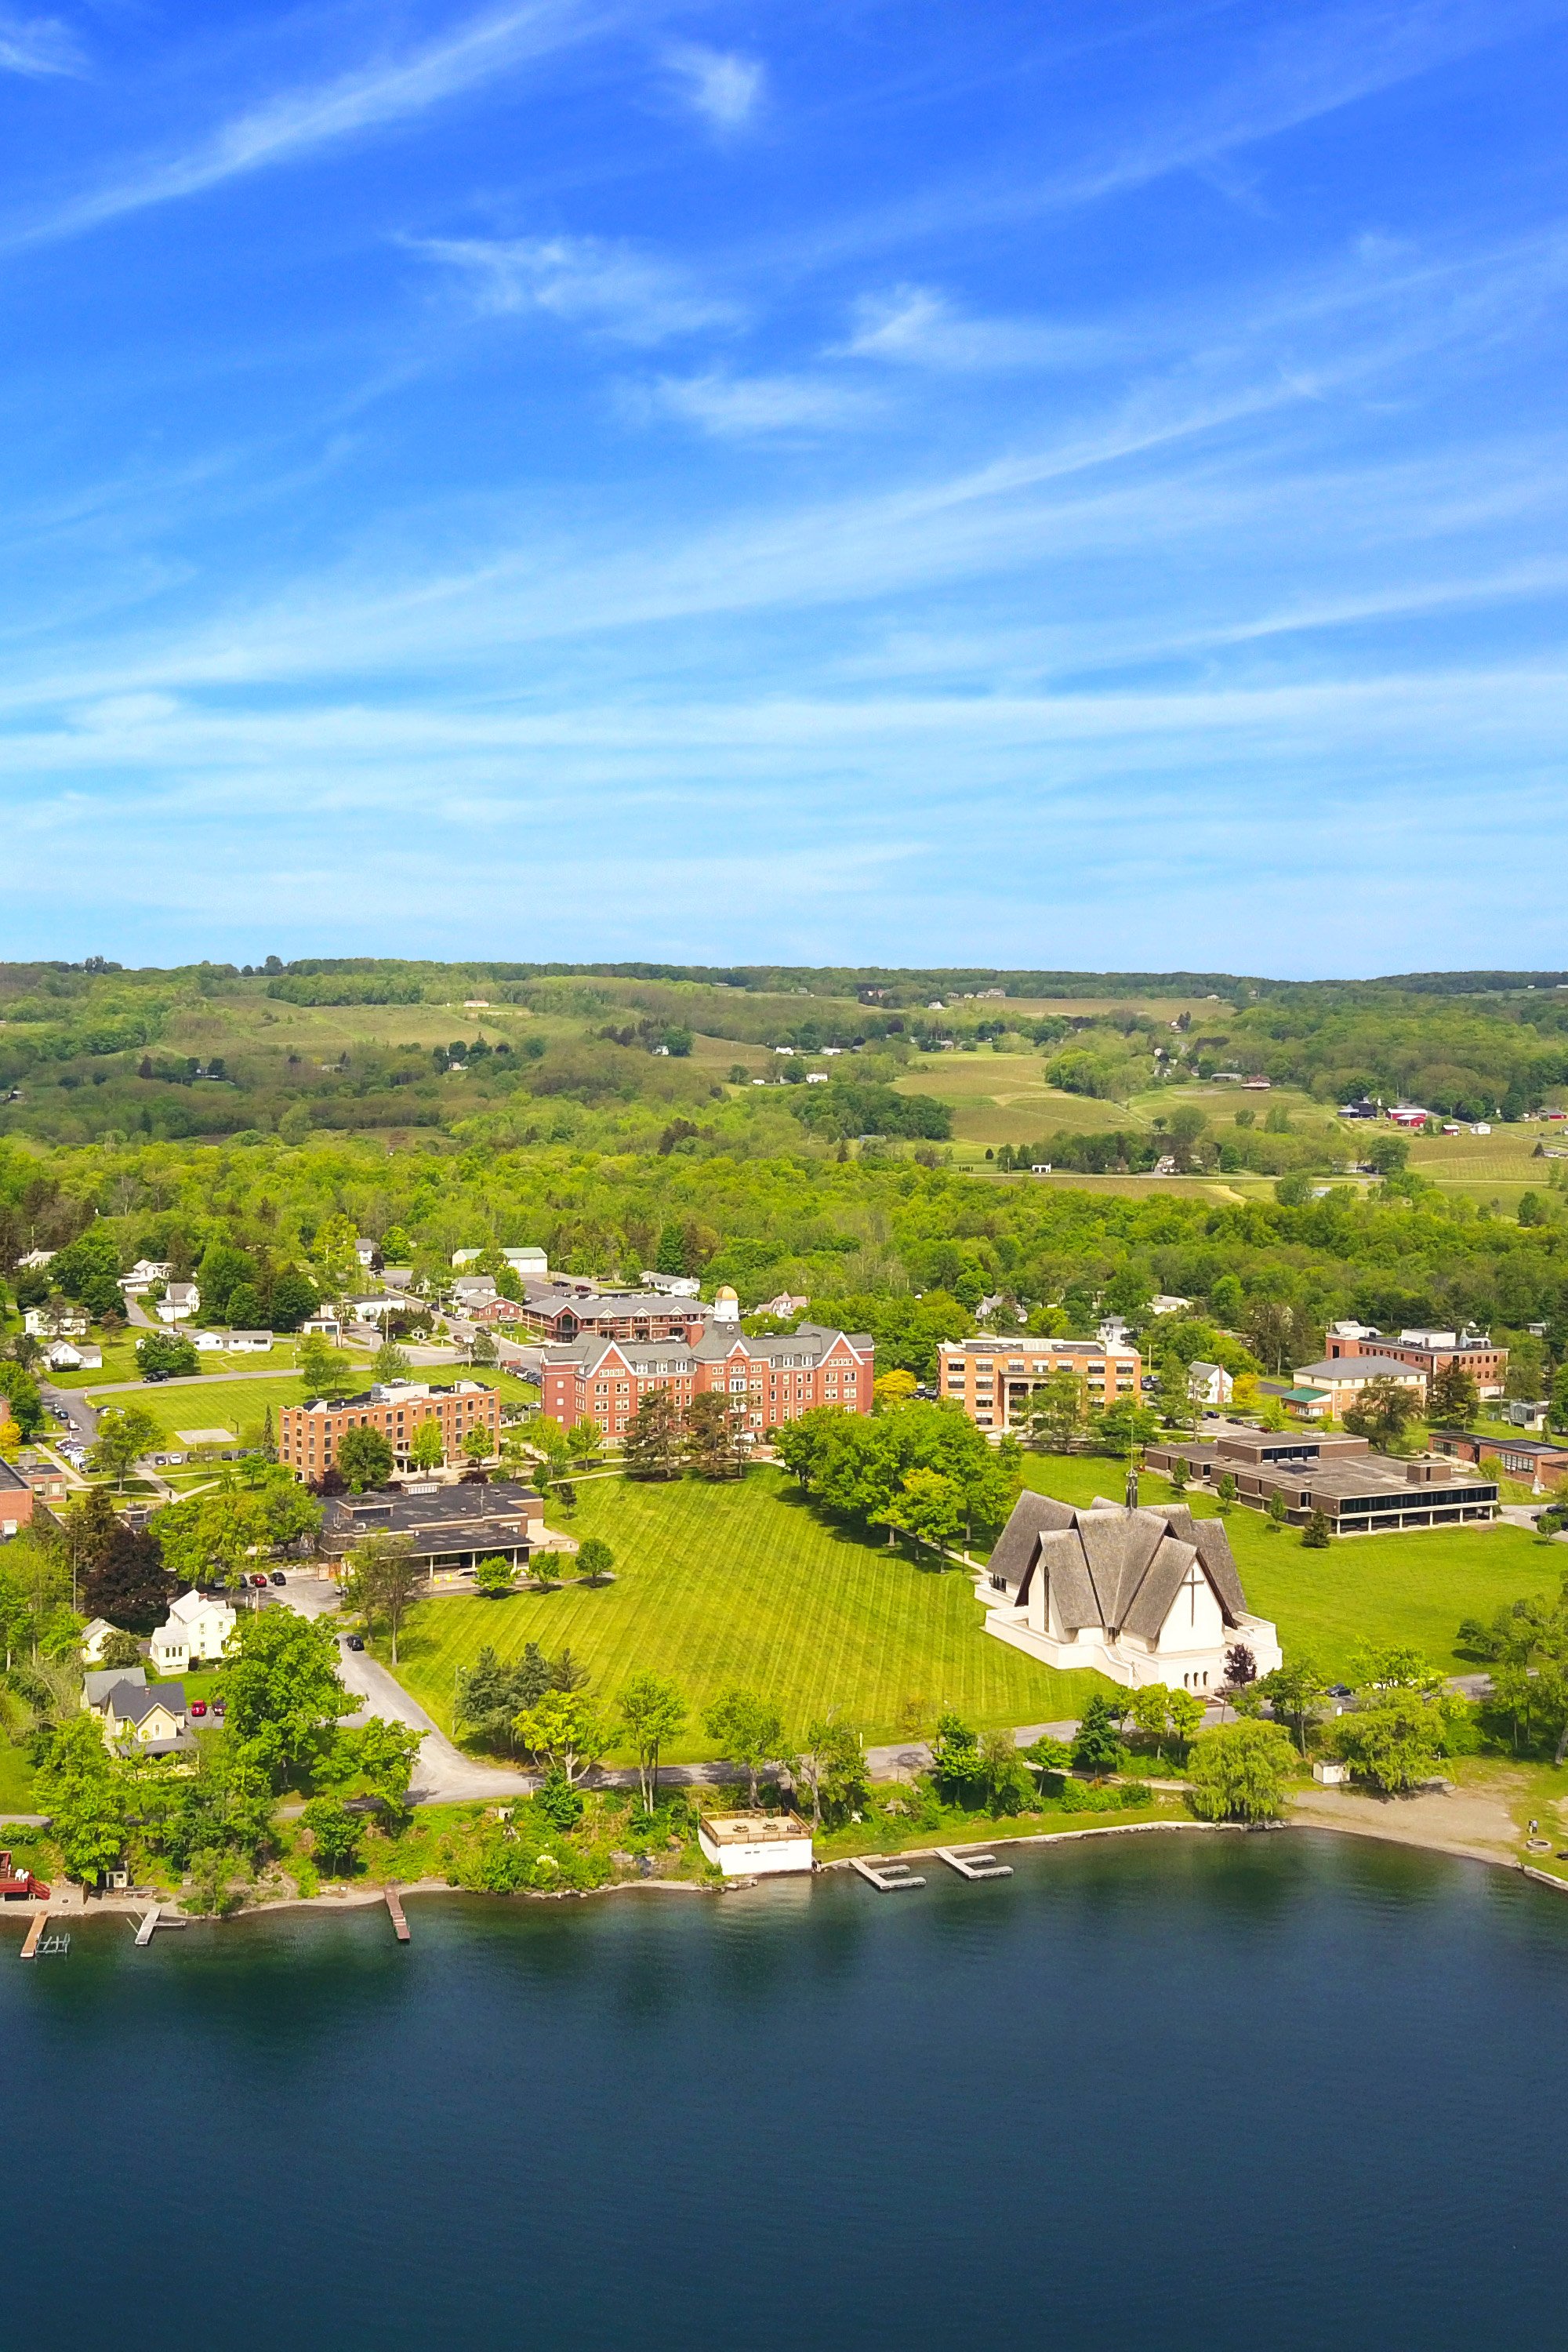 Keuka College from the air